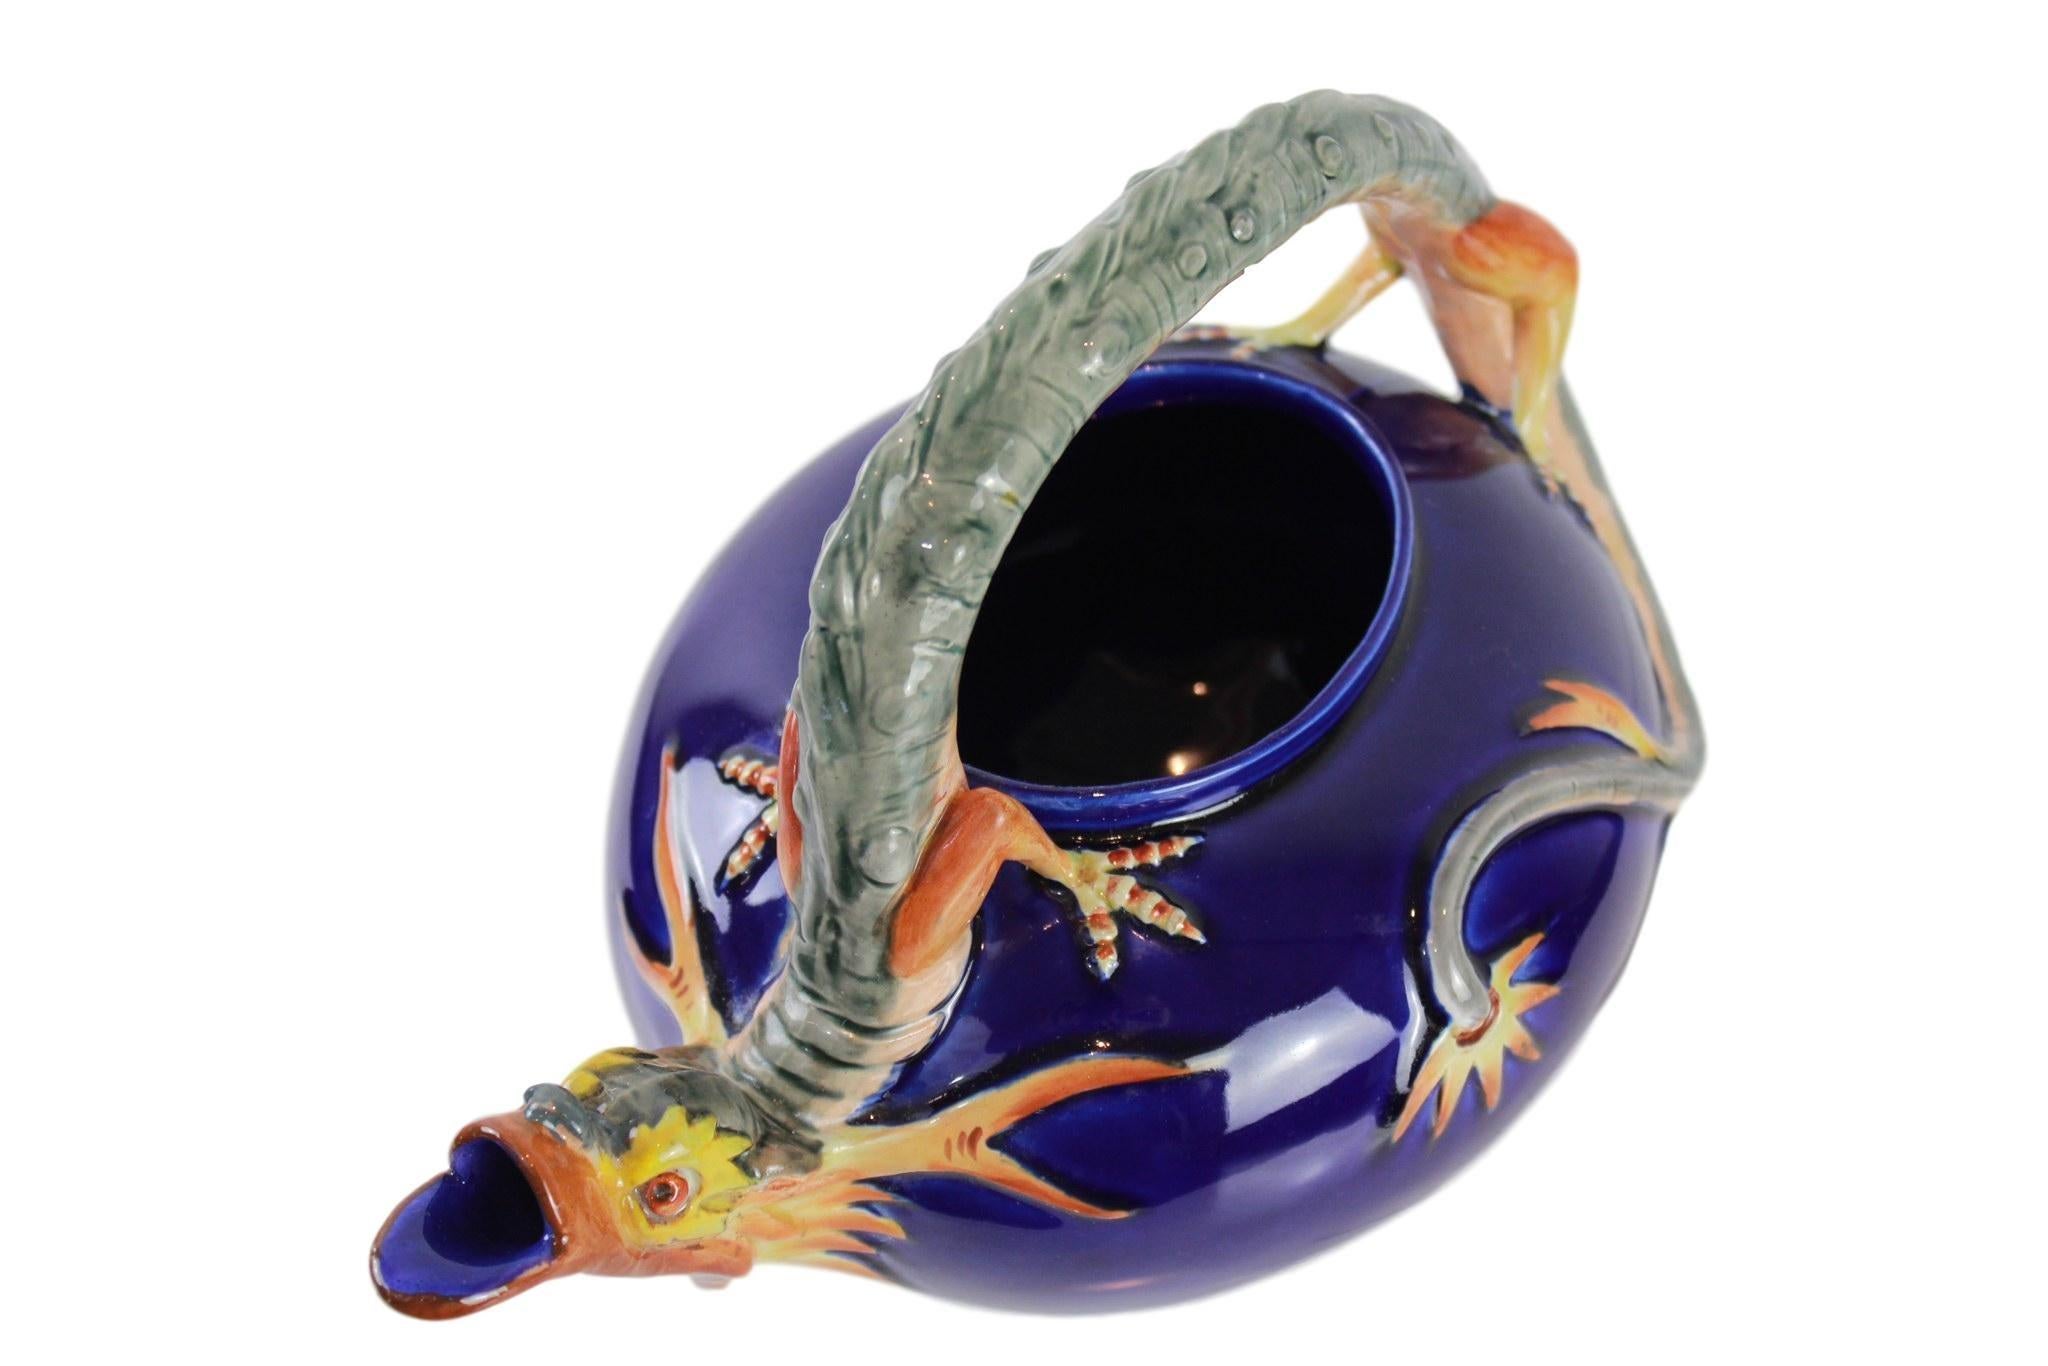 Late 19th Century Wedgwood Majolica Dragon Teapot in Cobalt Blue by Hugues Protât, Dated 1871